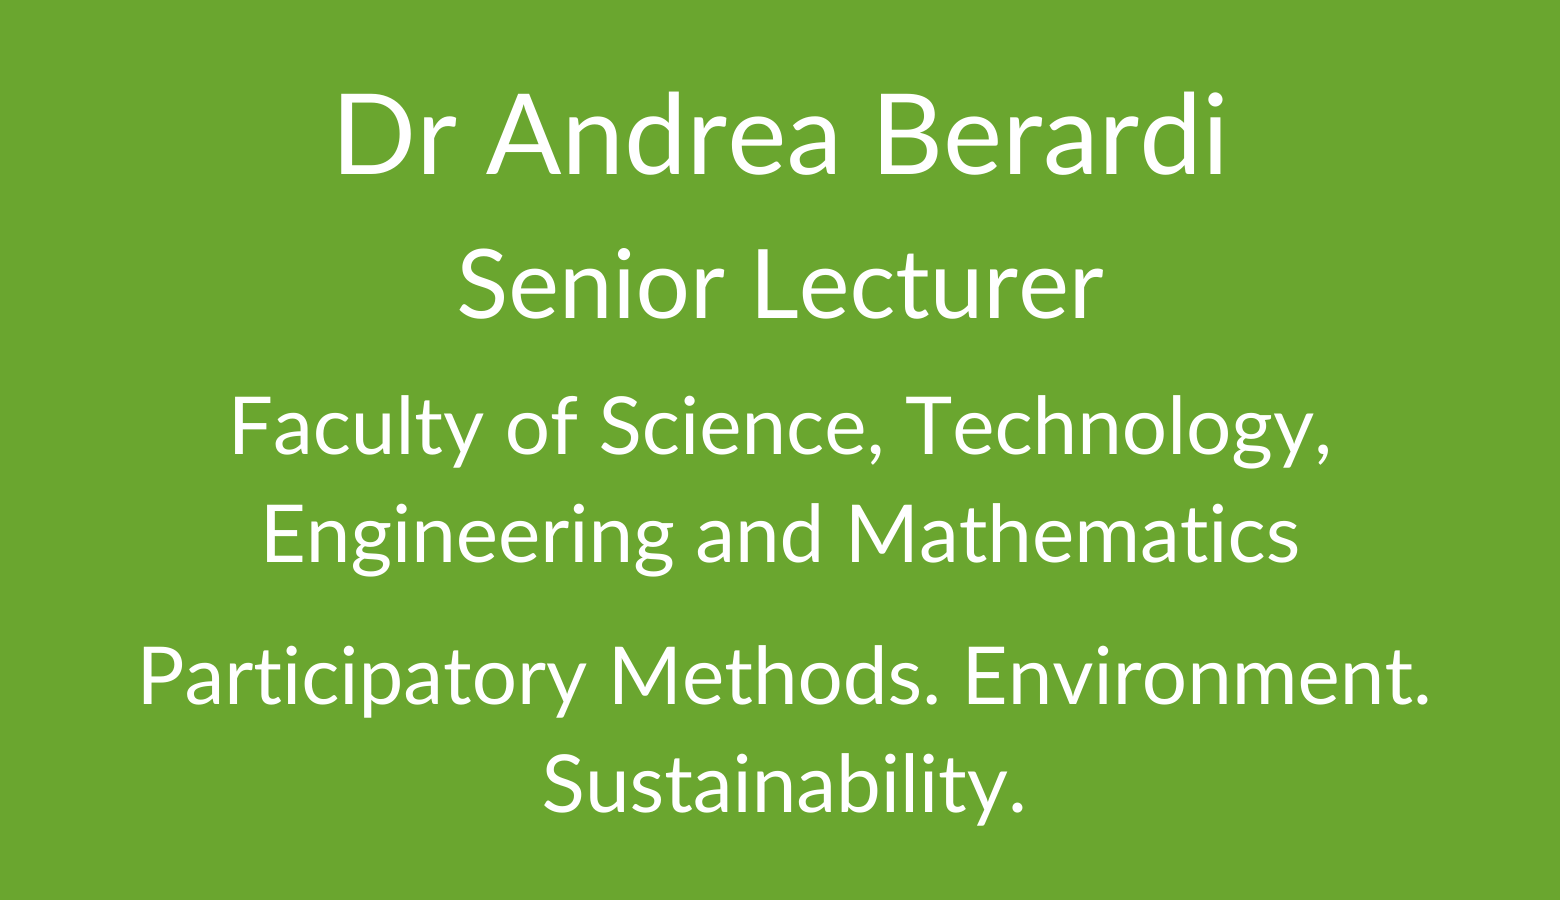 Dr Andrea Berardi. Senior Lecturer. Faculty of Science. Technology, Engineering and Mathematics. Participatory Methods. Environment. Sustainability.